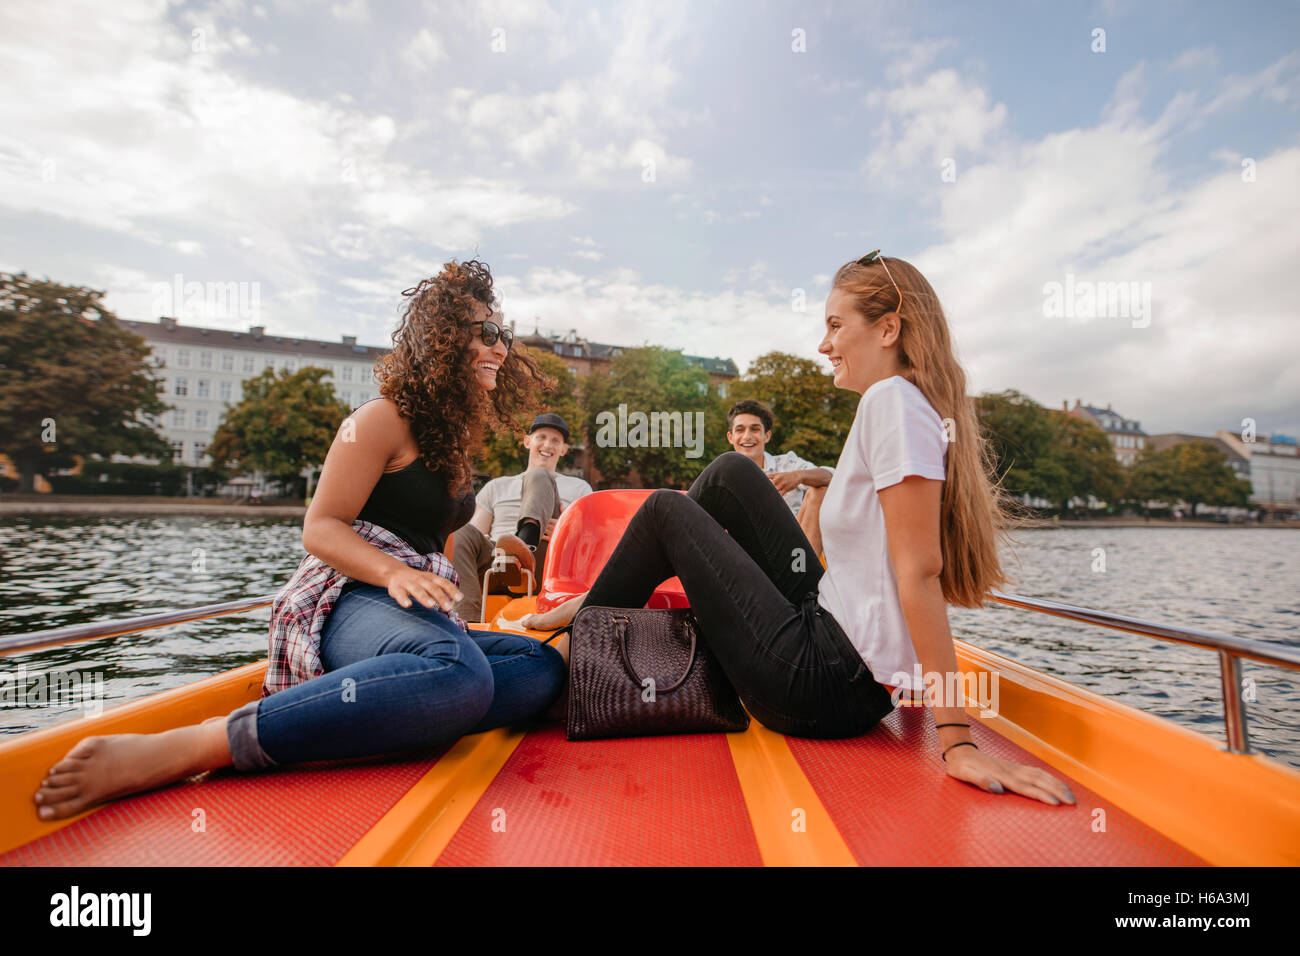 Shot of teenage girls sitting in the front of a boat in lake with male friends pedaling in background. Teenage friends relaxing Stock Photo